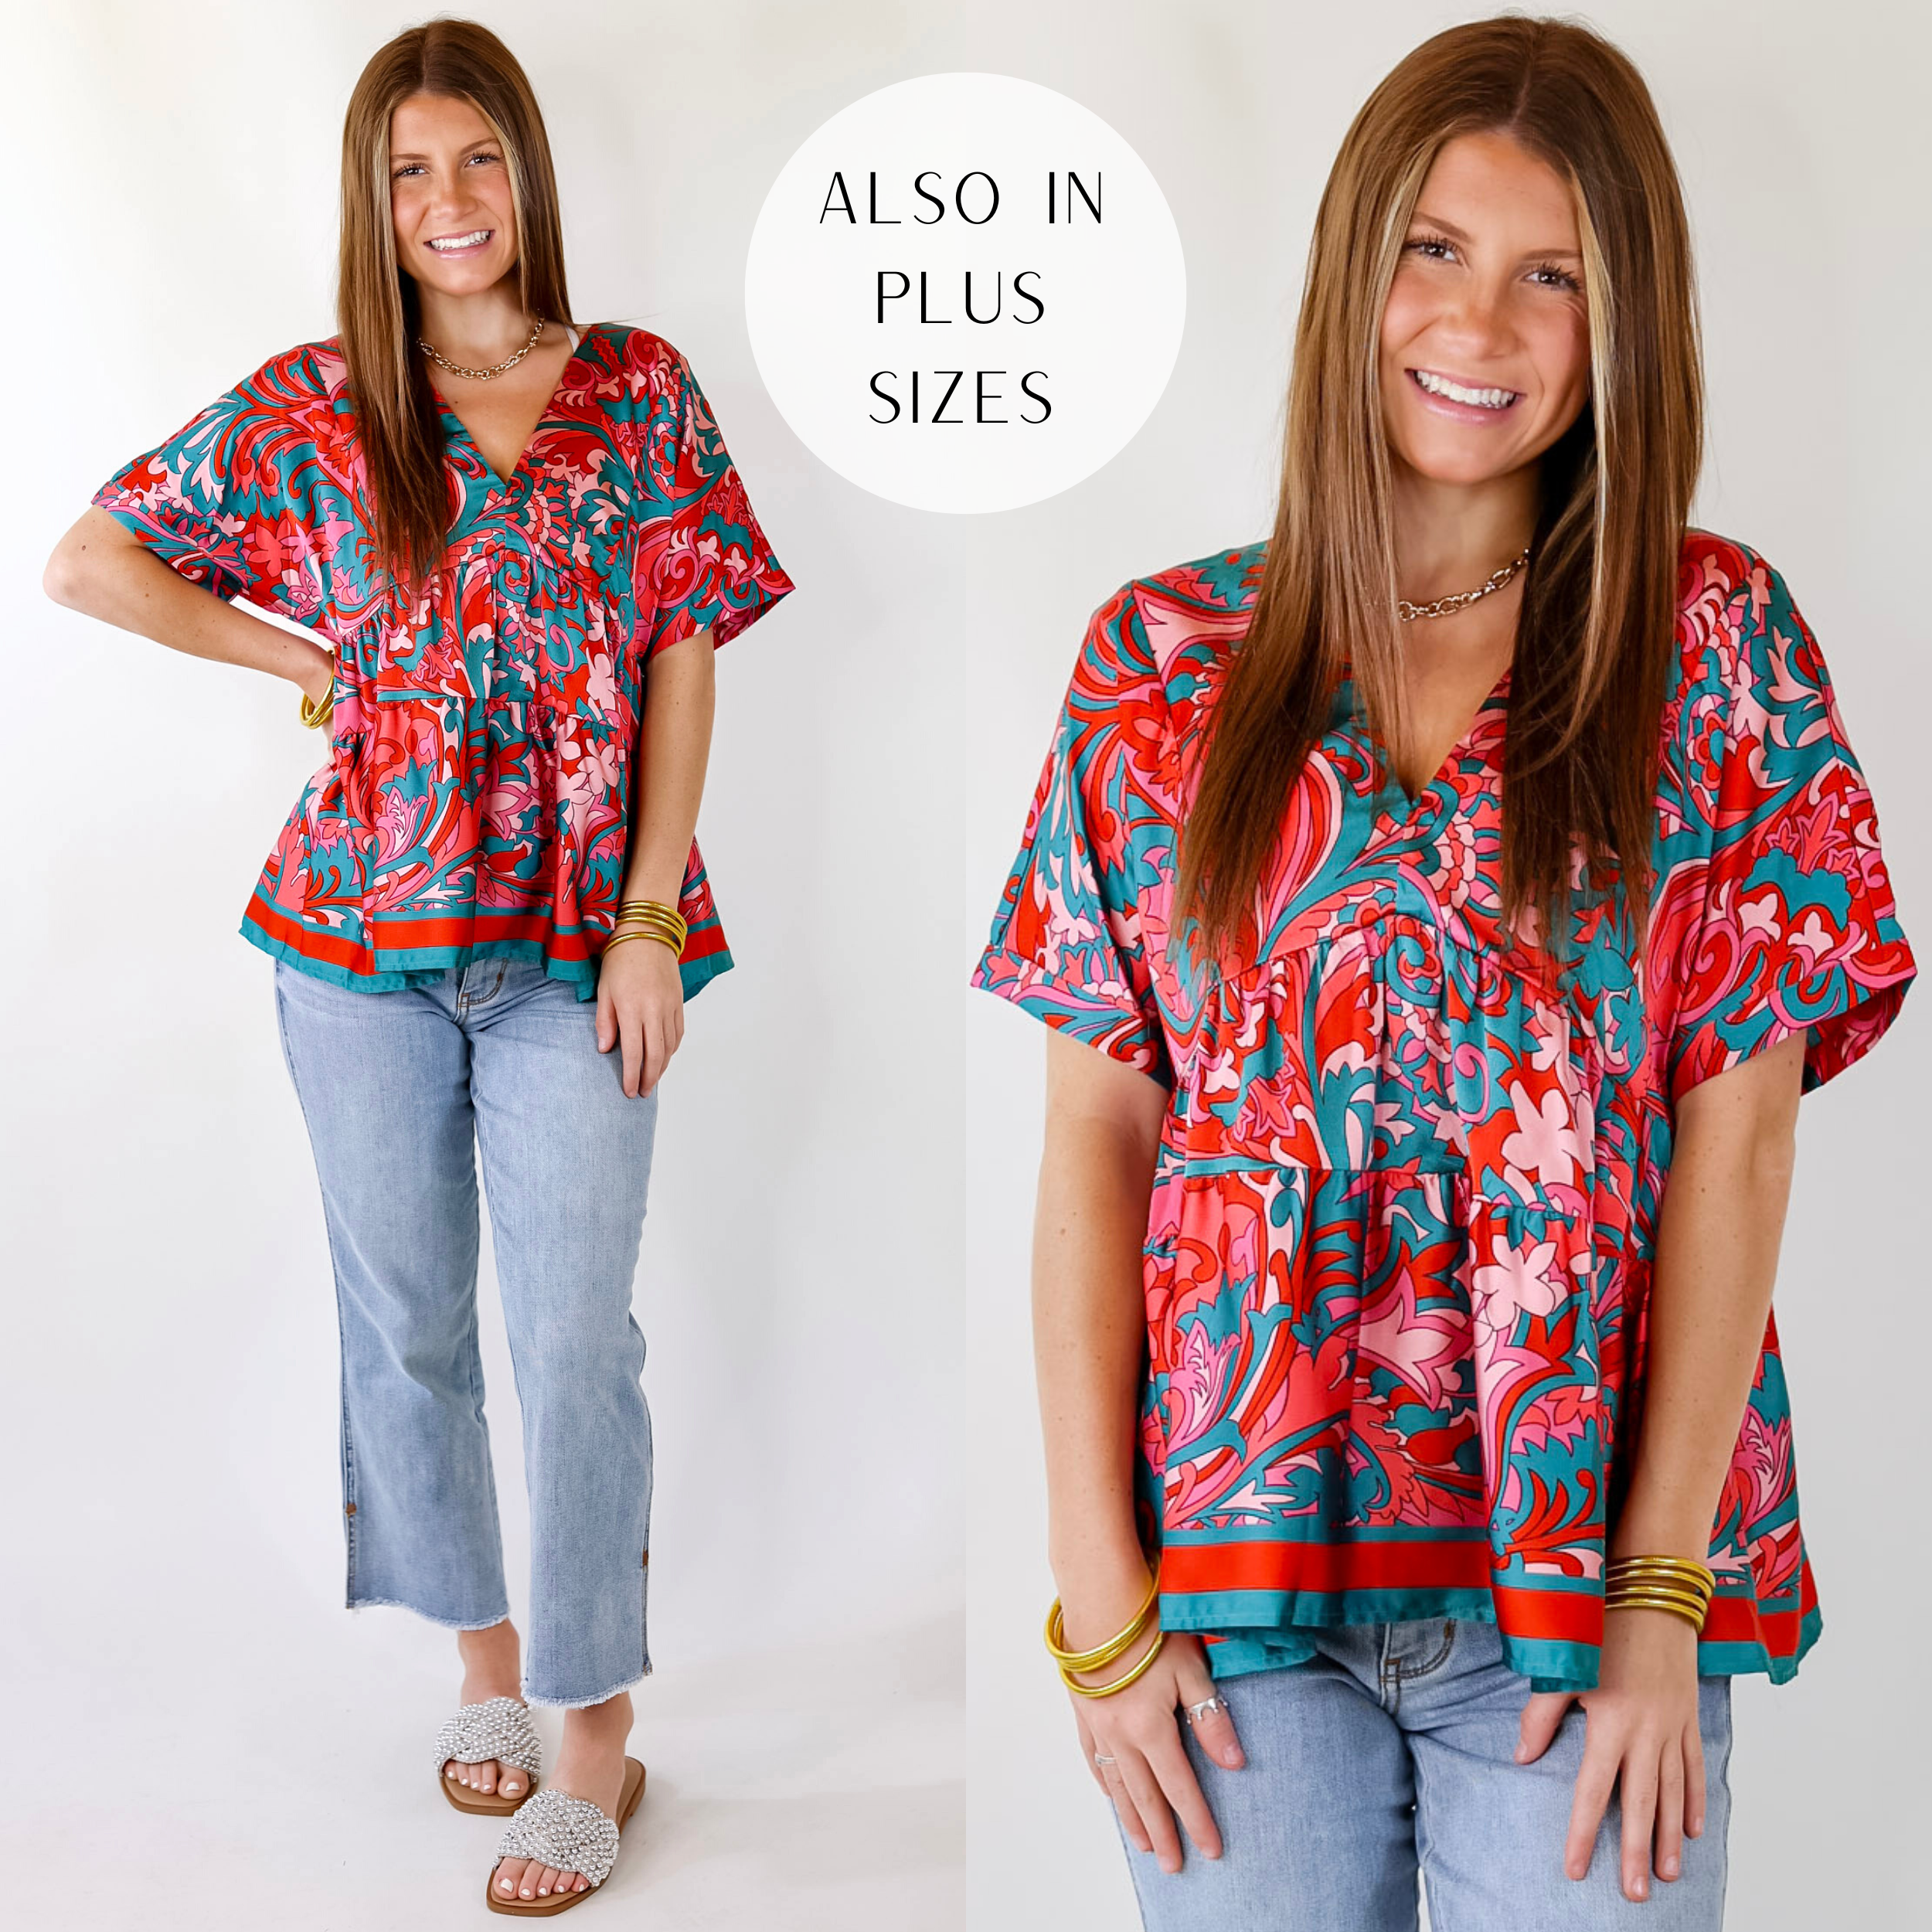 Merlot Meeting Baroque Print V Neck Top in Pink and Teal - Giddy Up Glamour Boutique